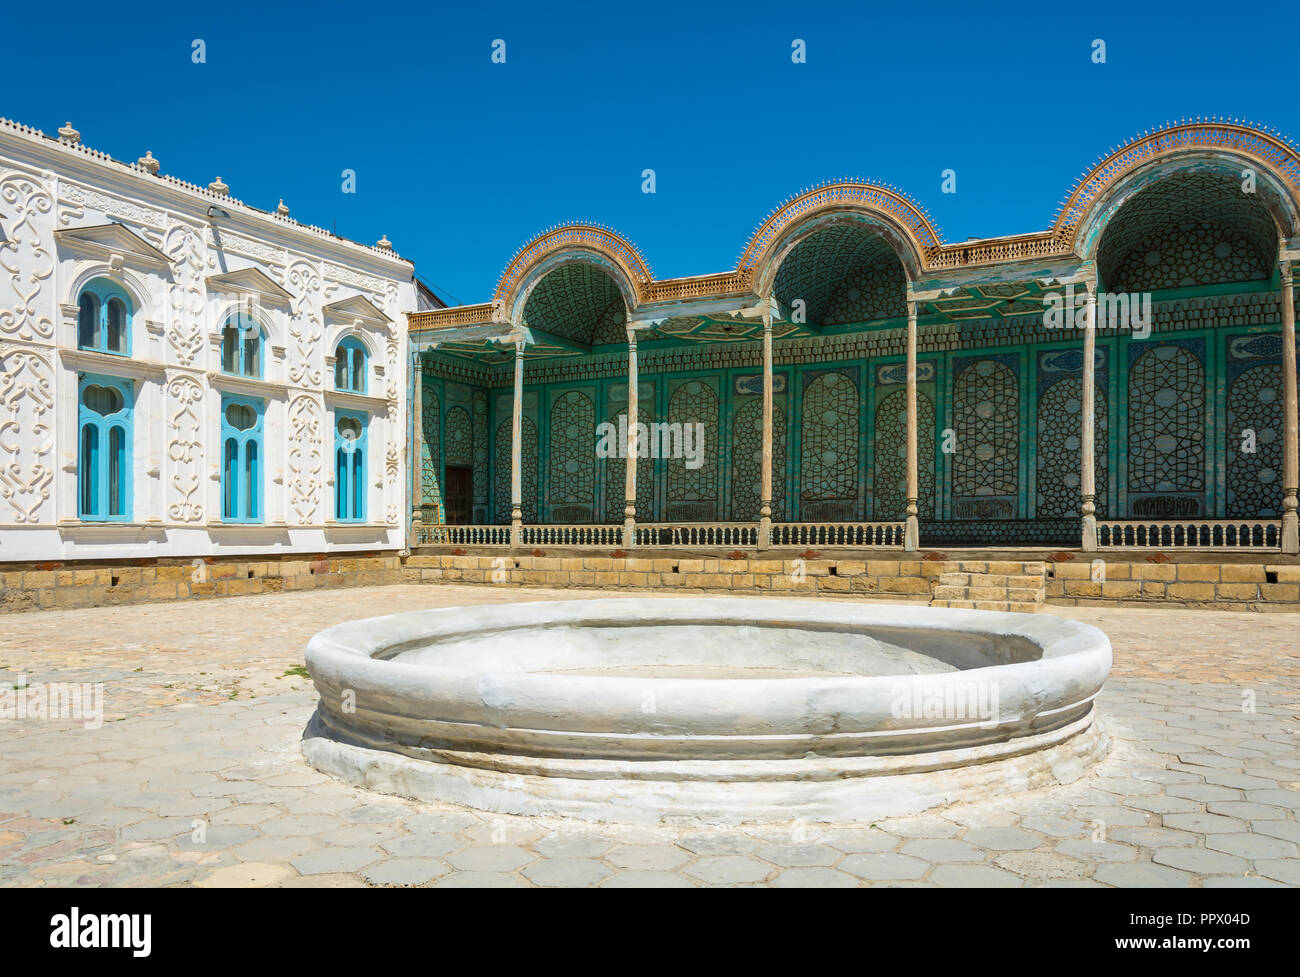 Summer residence of the last Emir of Bukhara on a clear Sunny day, Uzbekistan. Stock Photo